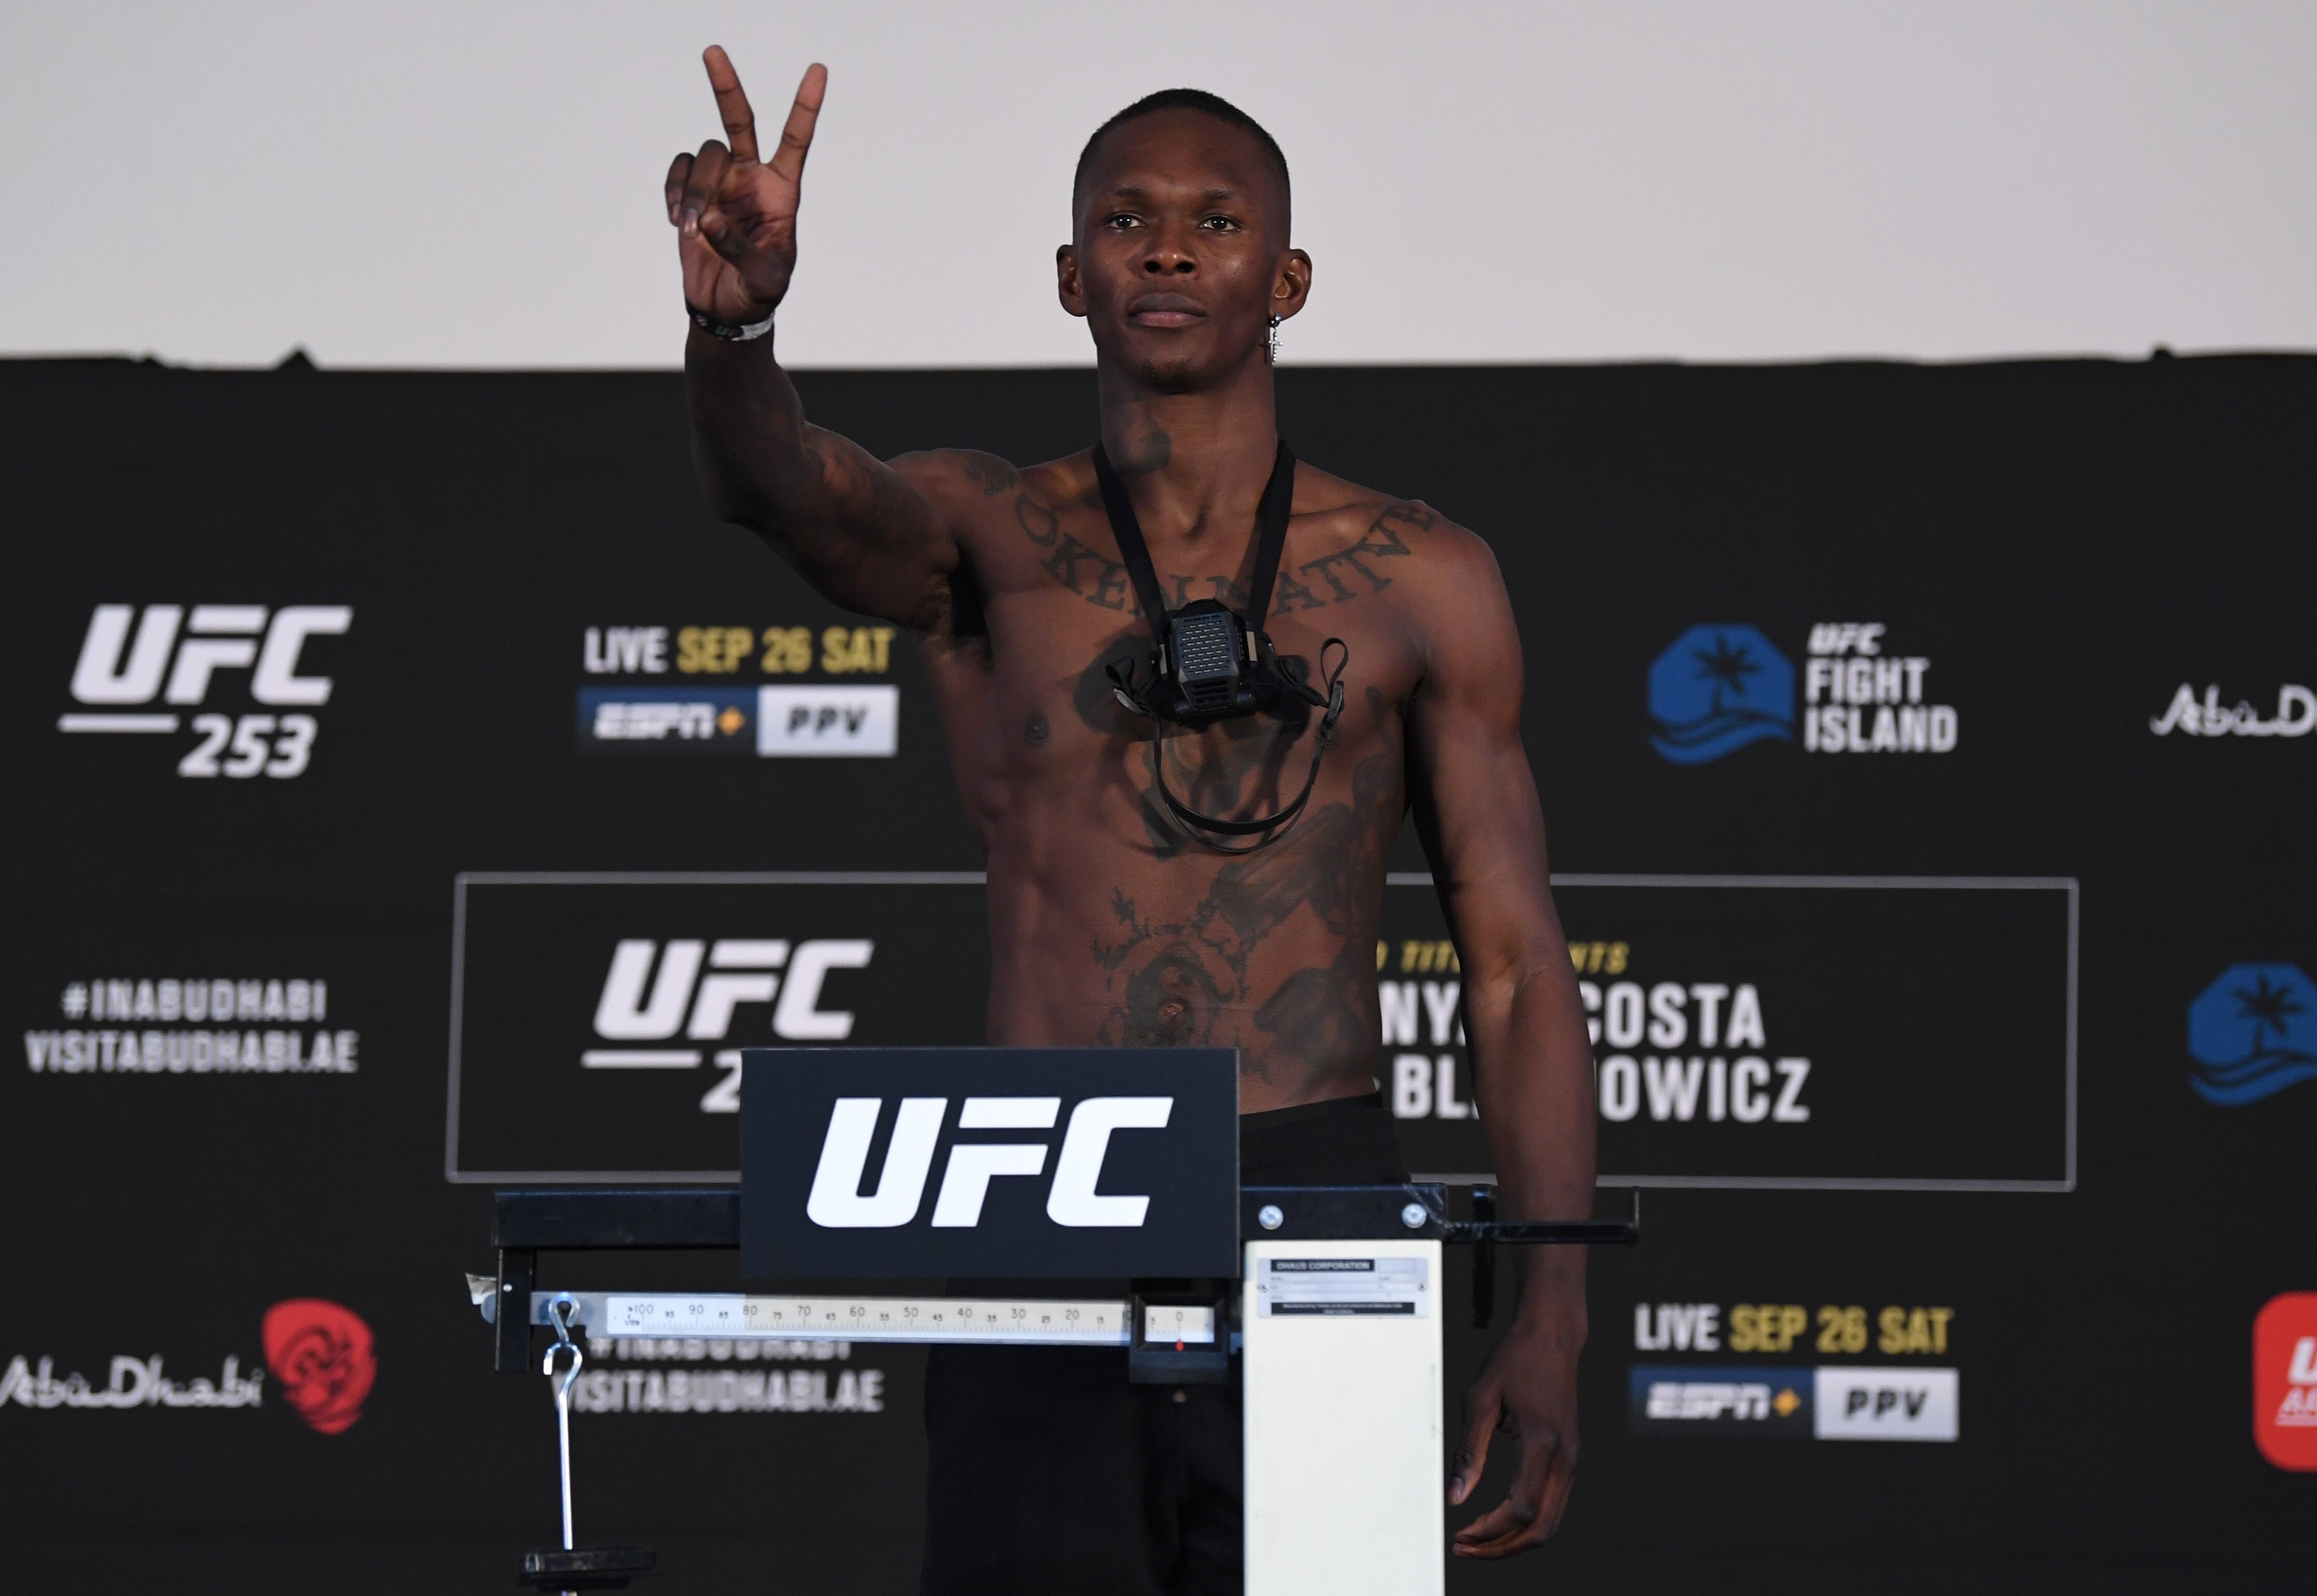 Israel Adesanya poses on the scale during the UFC 253 weigh-in on September 25, 2020 at Flash Forum on UFC Fight Island, Abu Dhabi, United Arab Emirates. Photo: Josh Hedges/Zuffa LLC via Getty Images